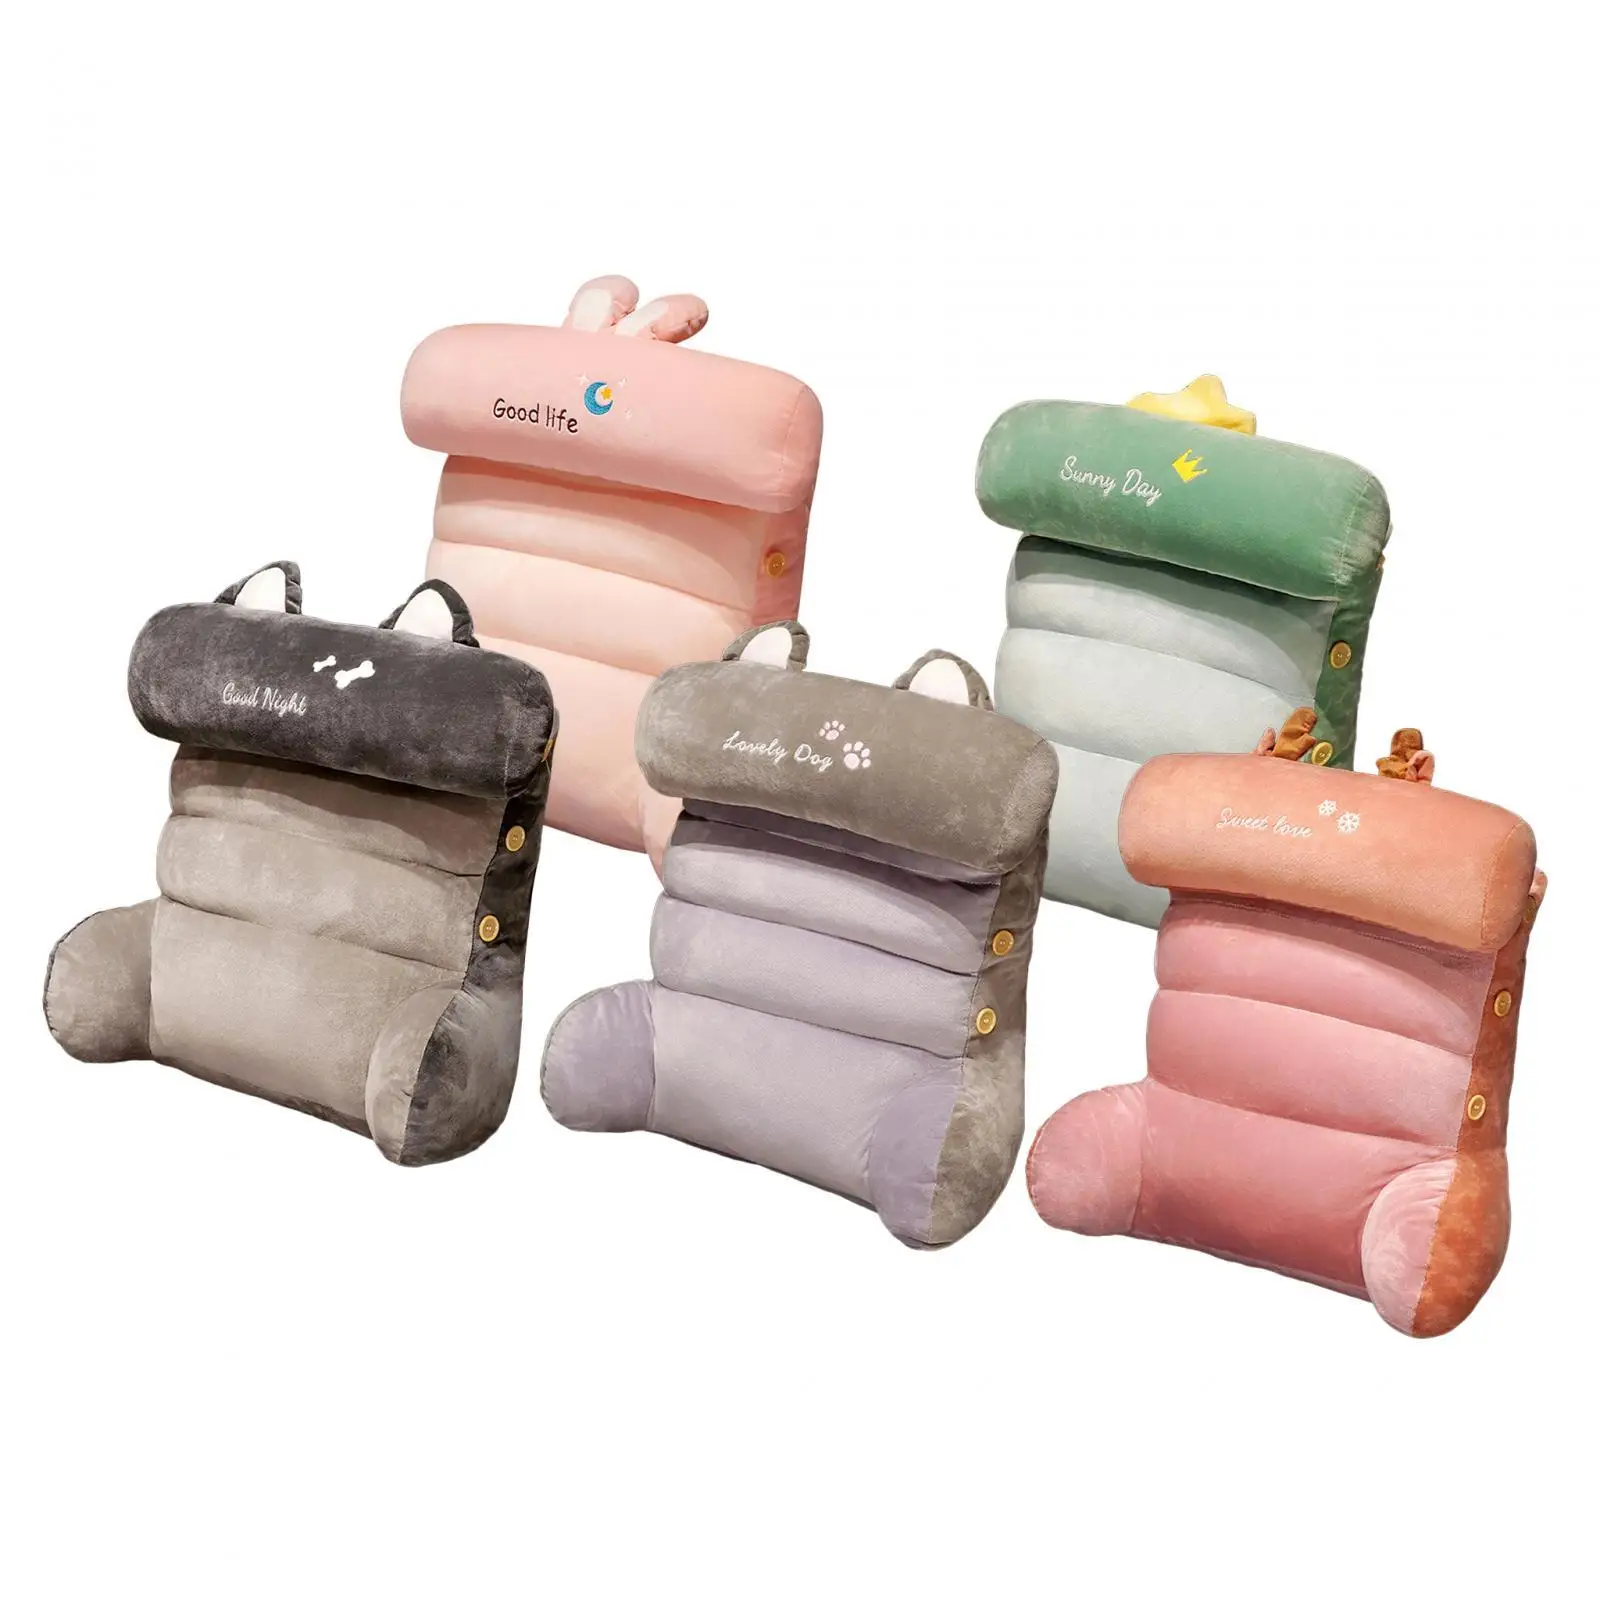 Plush Backrest Pillow waist Support Cushion with Arms and Pockets Chair Cushion Adult Backrest Lounge Cushion for Gaming Chair